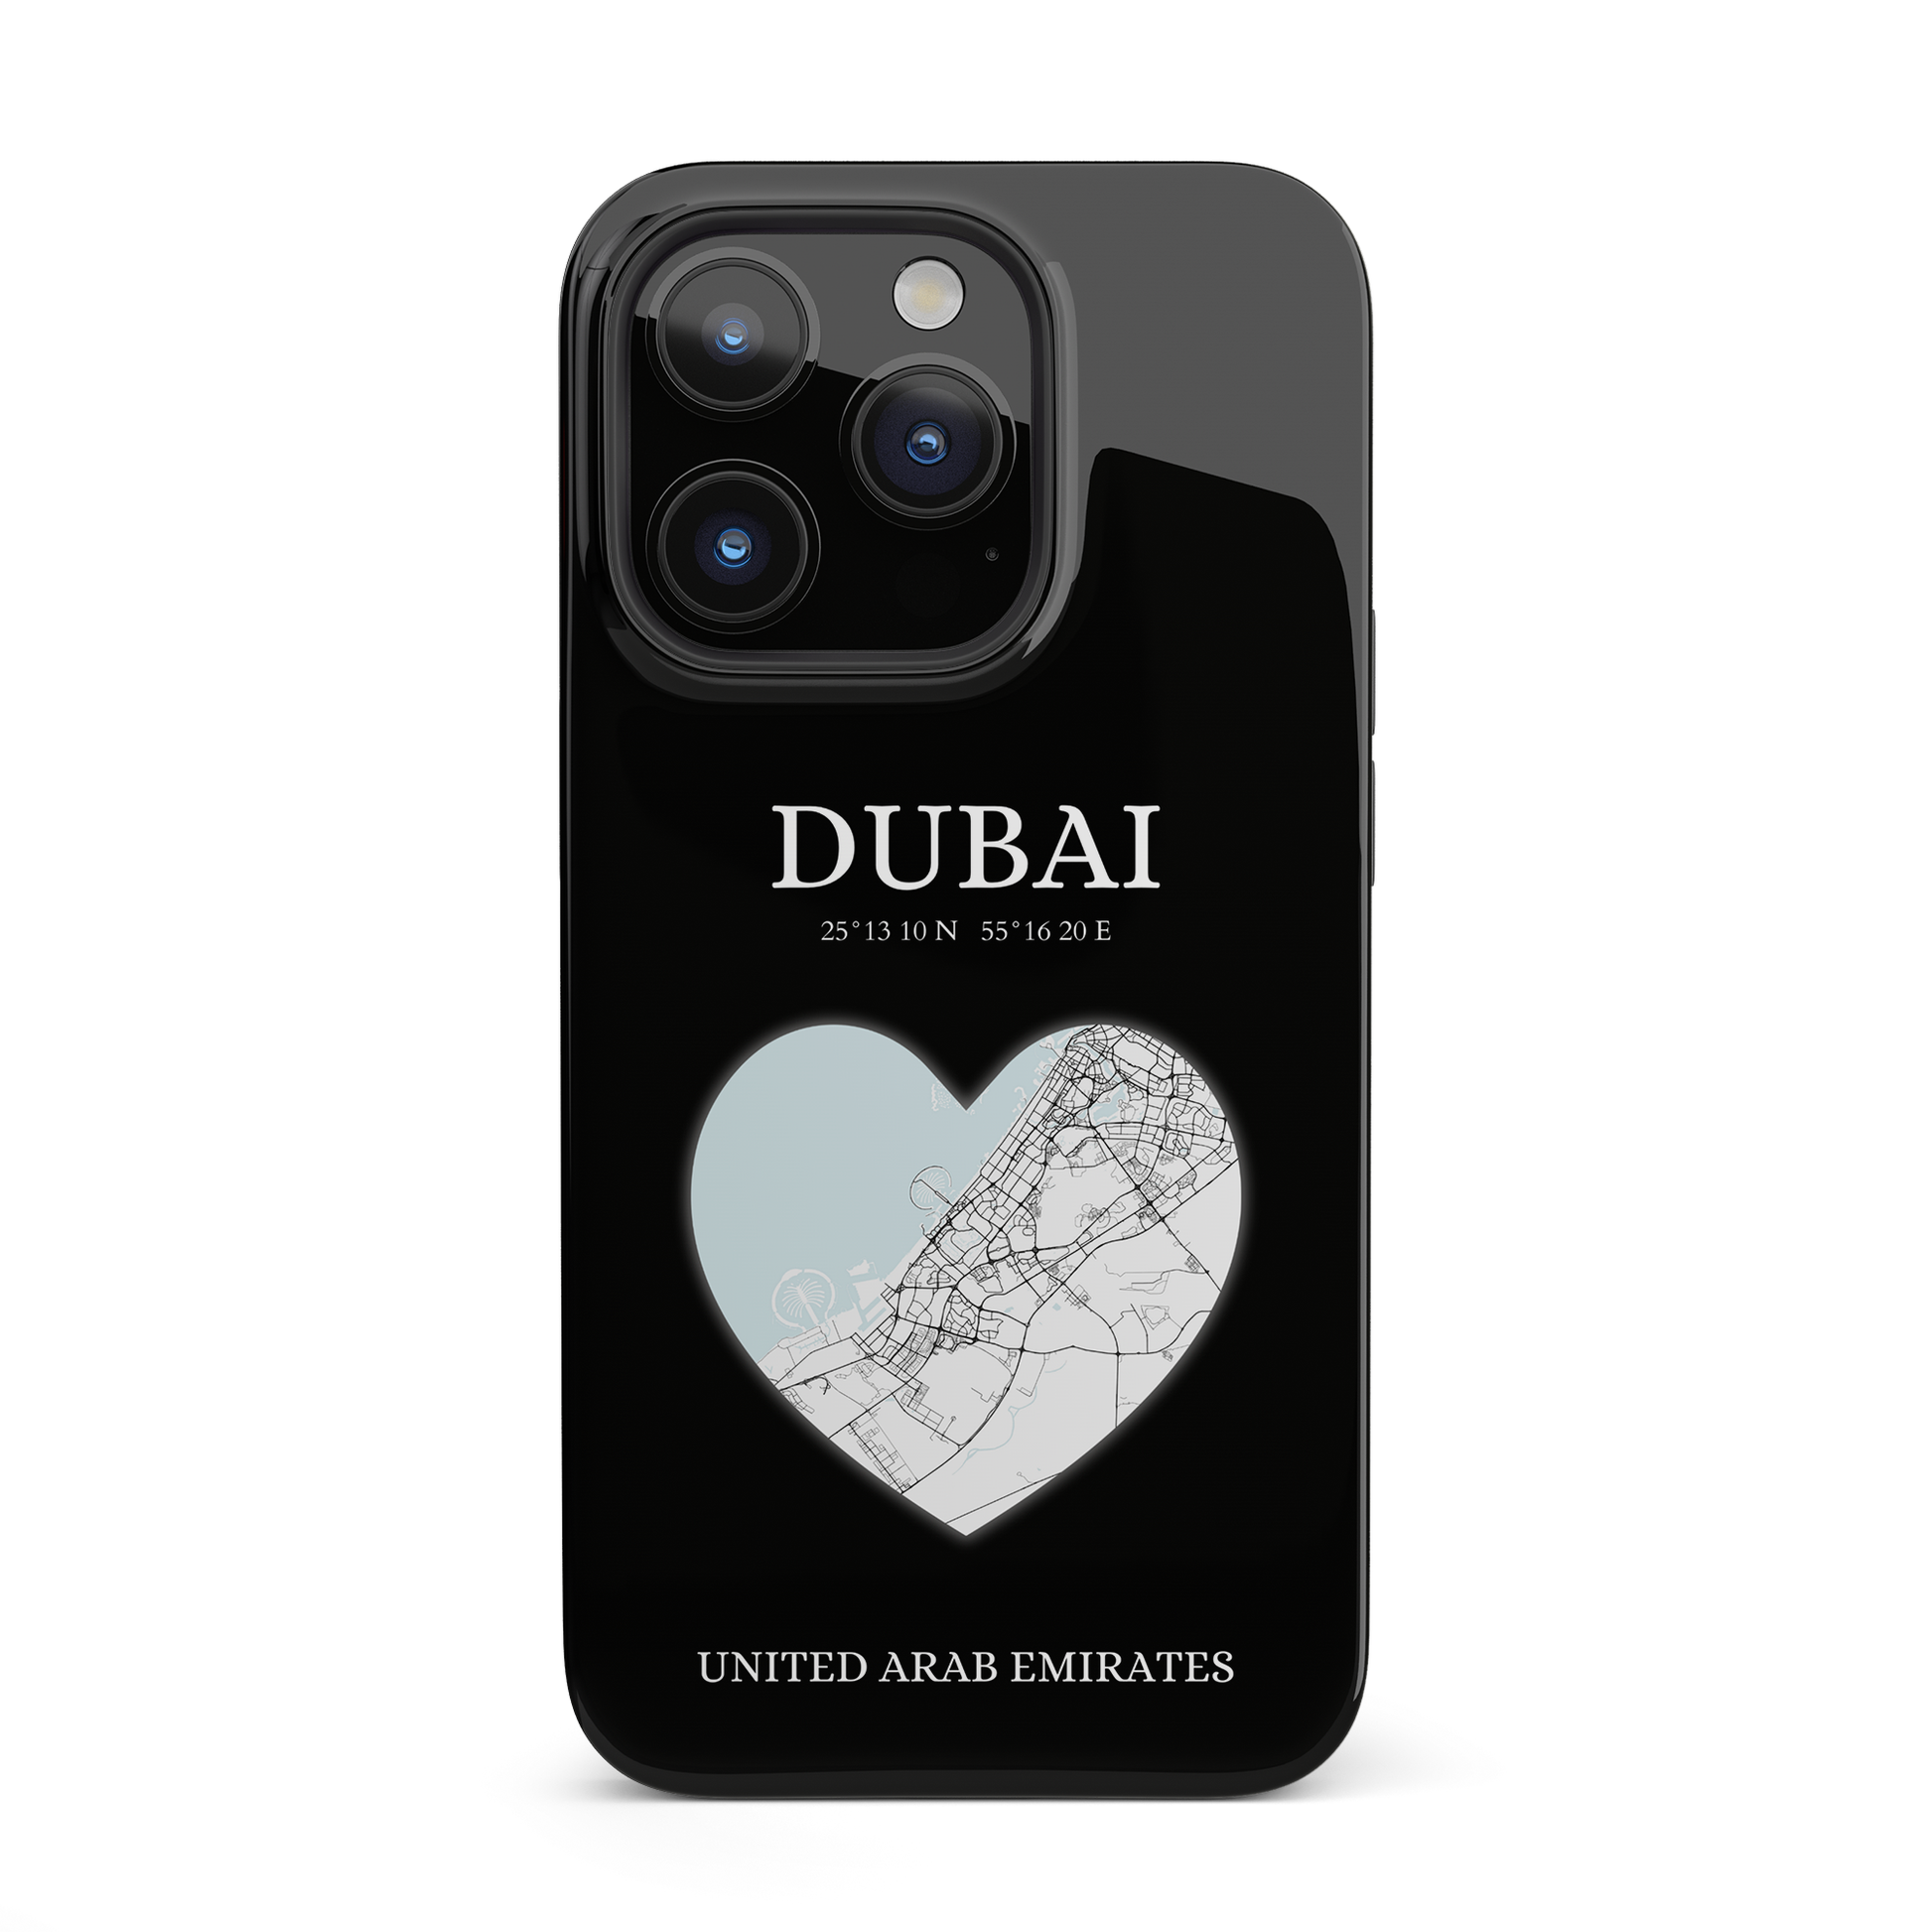 Dubai Heartbeat - Black (iPhone Case 11-15)Elevate your iPhone with RimaGallery's Dubai York Heartbeat case. Sleek design meets durability for stylish protection. Free US shipping.RimaGallery